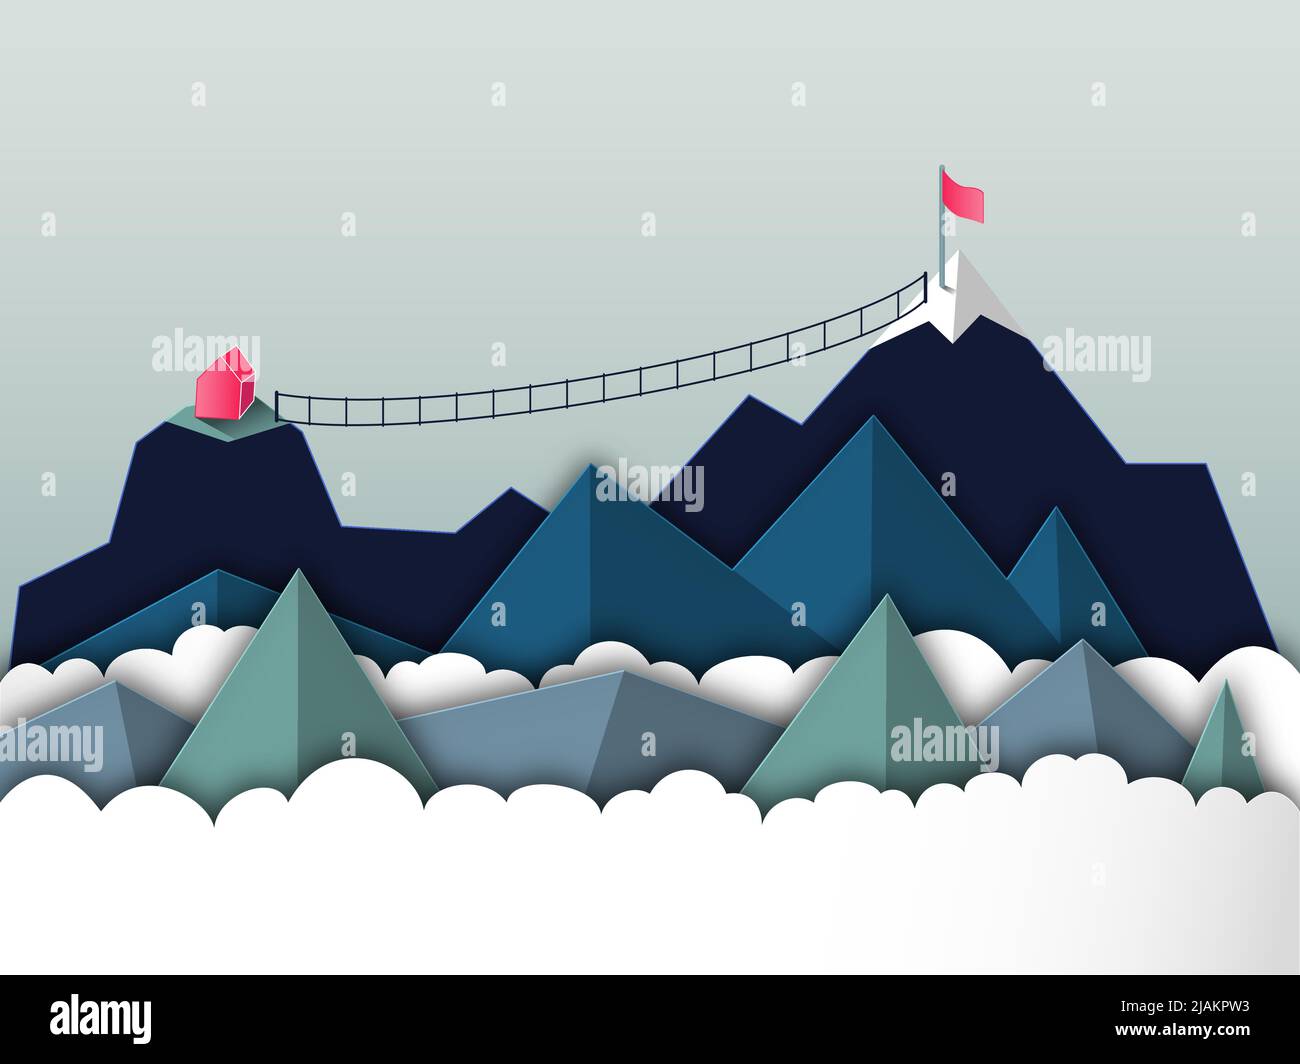 Business concept of overcoming obstacles and accepting challenges. Illustration of a paper cut mountain top with hut and hanging bridge to reach the m Stock Vector